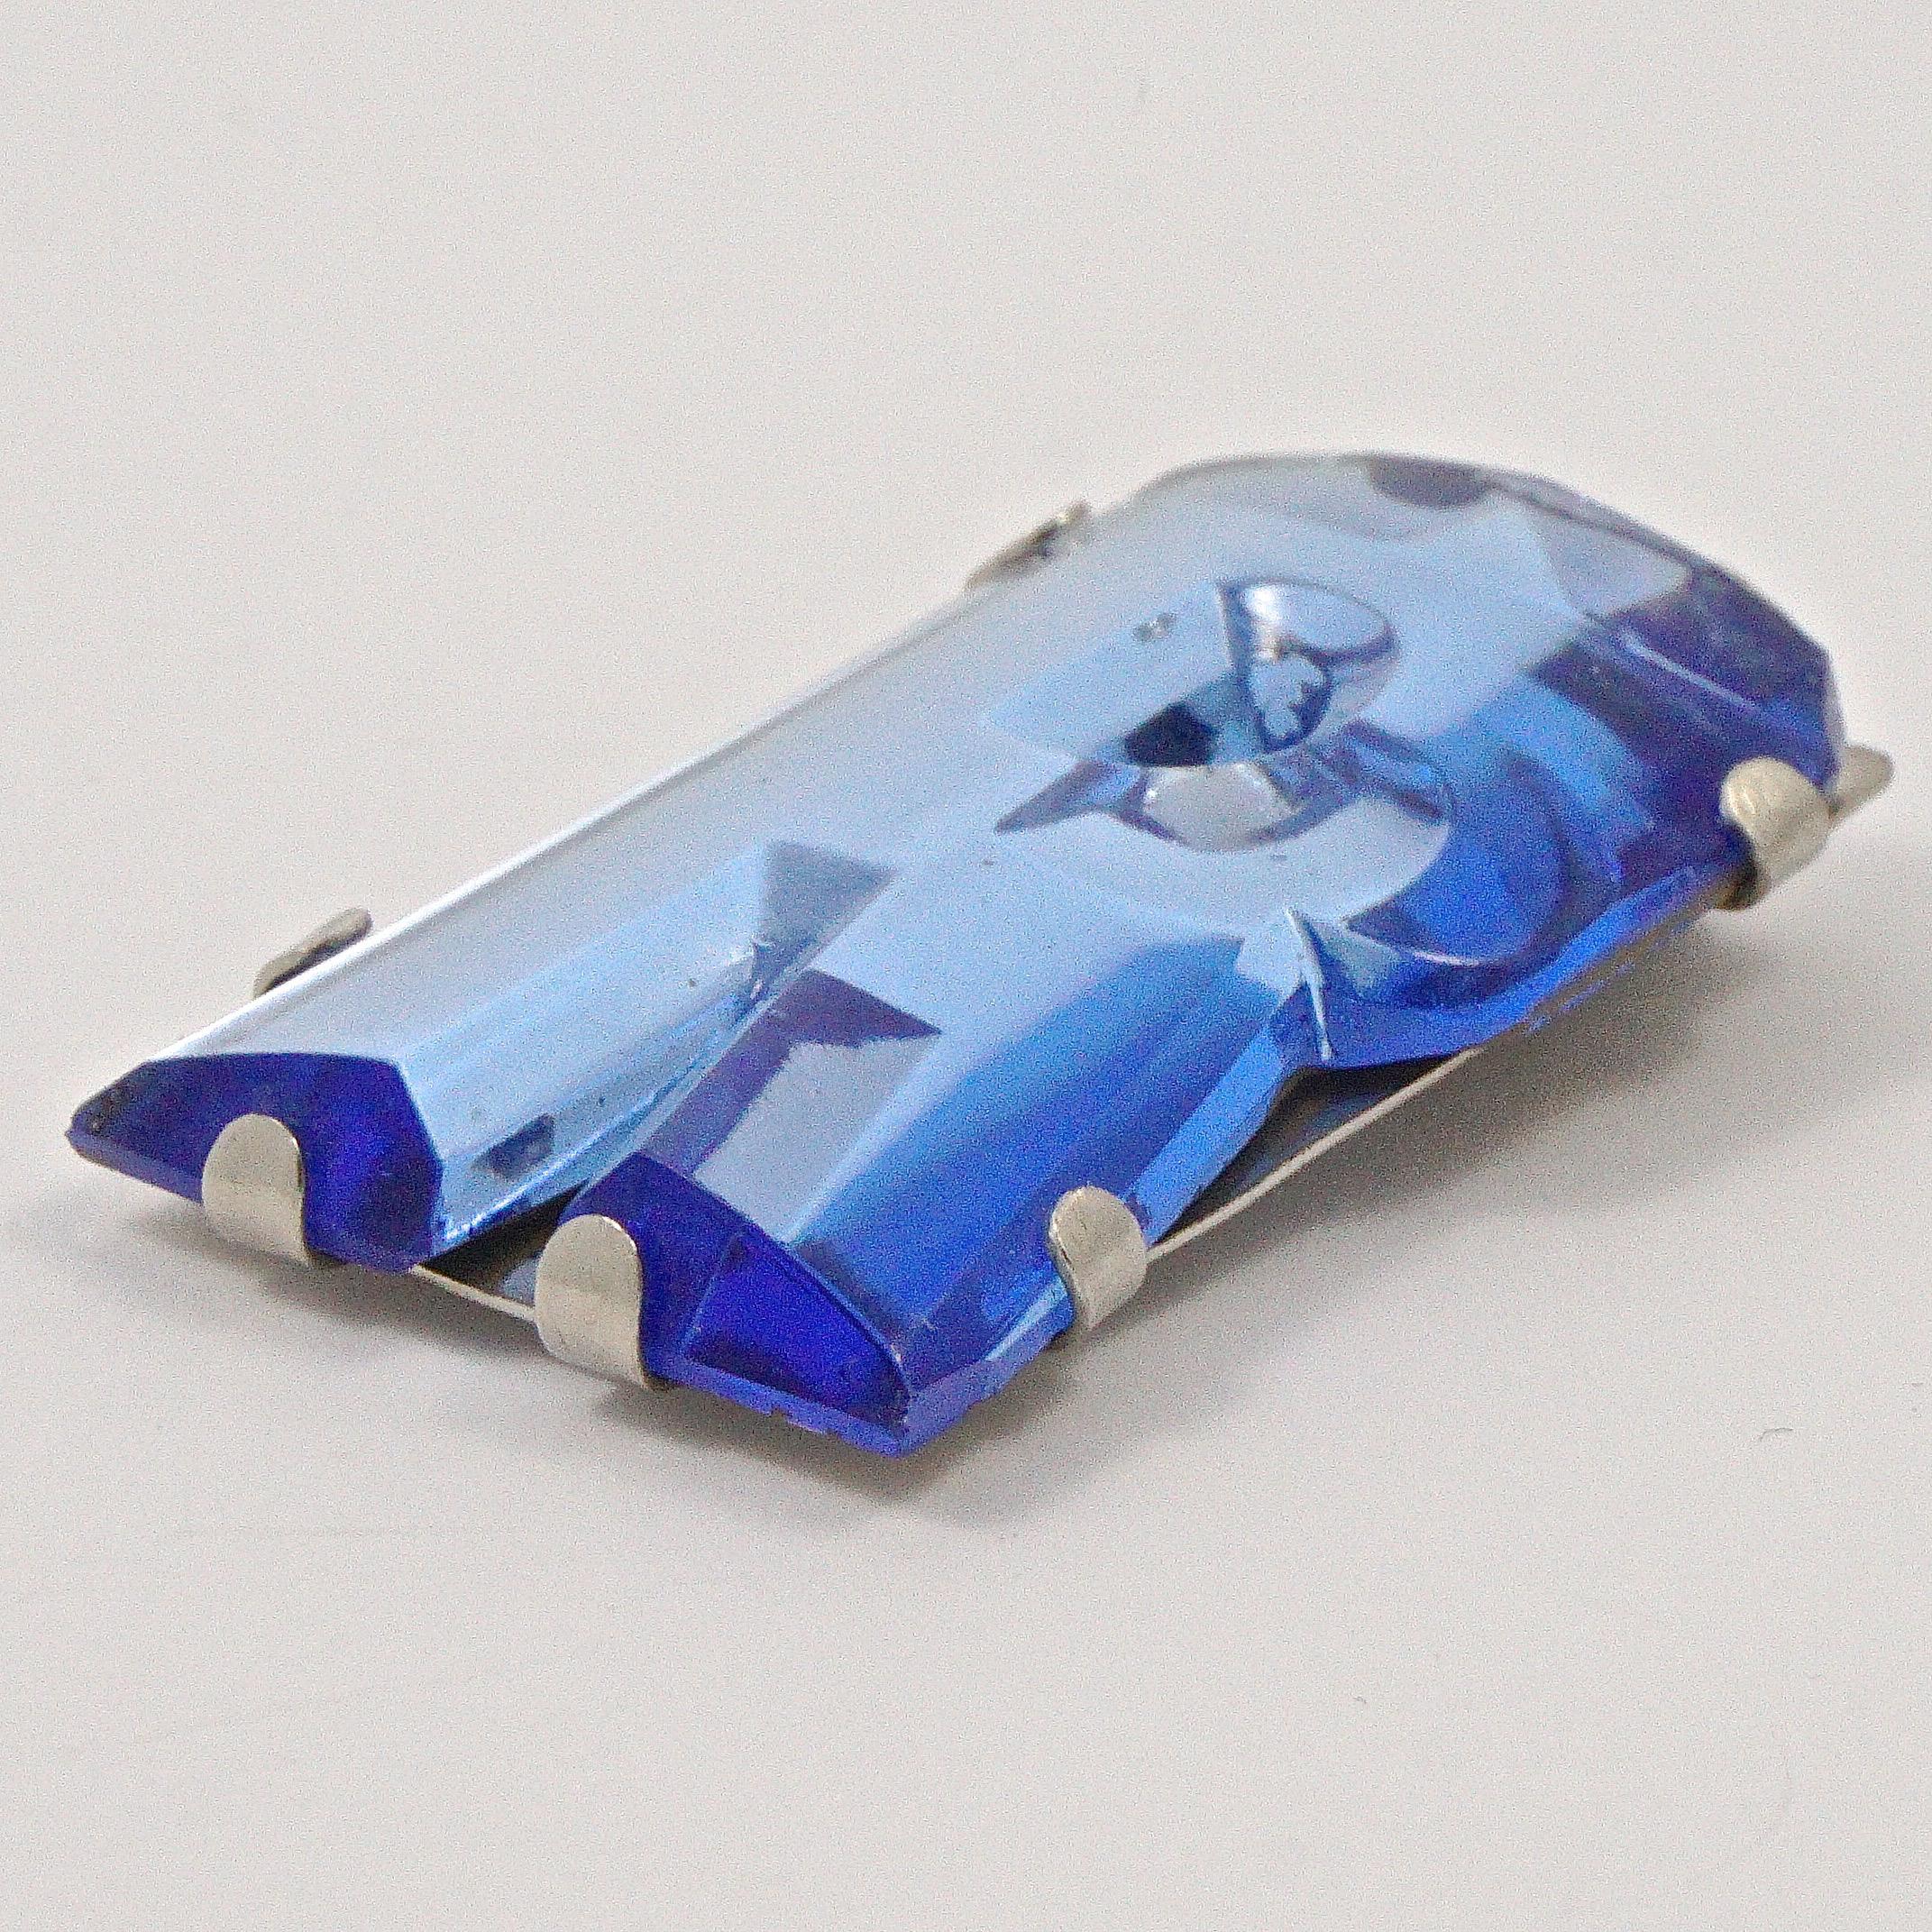 Art Deco blue glass mirrored initial R dress clip in a silver tone setting. The top is faceted. Measuring length 4cm / 1.57 inches by maximum width 2.3cm / .9 inch.  The dress clip is in very good condition, there are some chips, and the back is